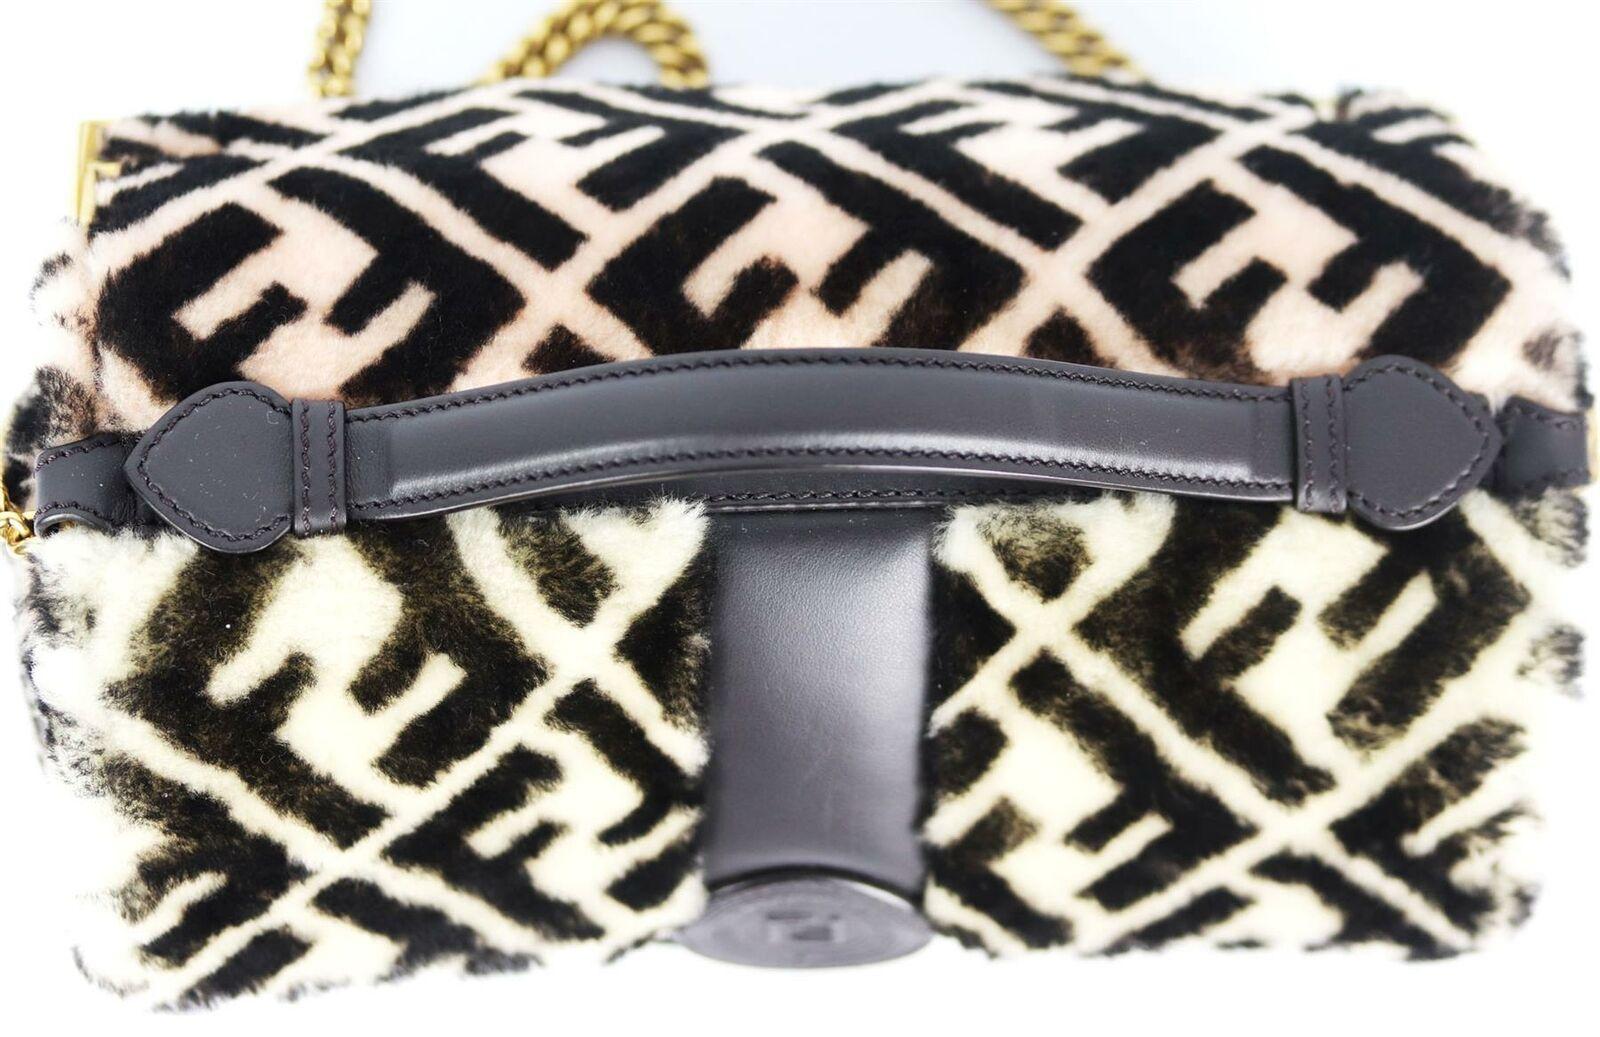 Fendi 1974 Double F Logo Print Shearling Shoulder Bag In Excellent Condition For Sale In London, GB